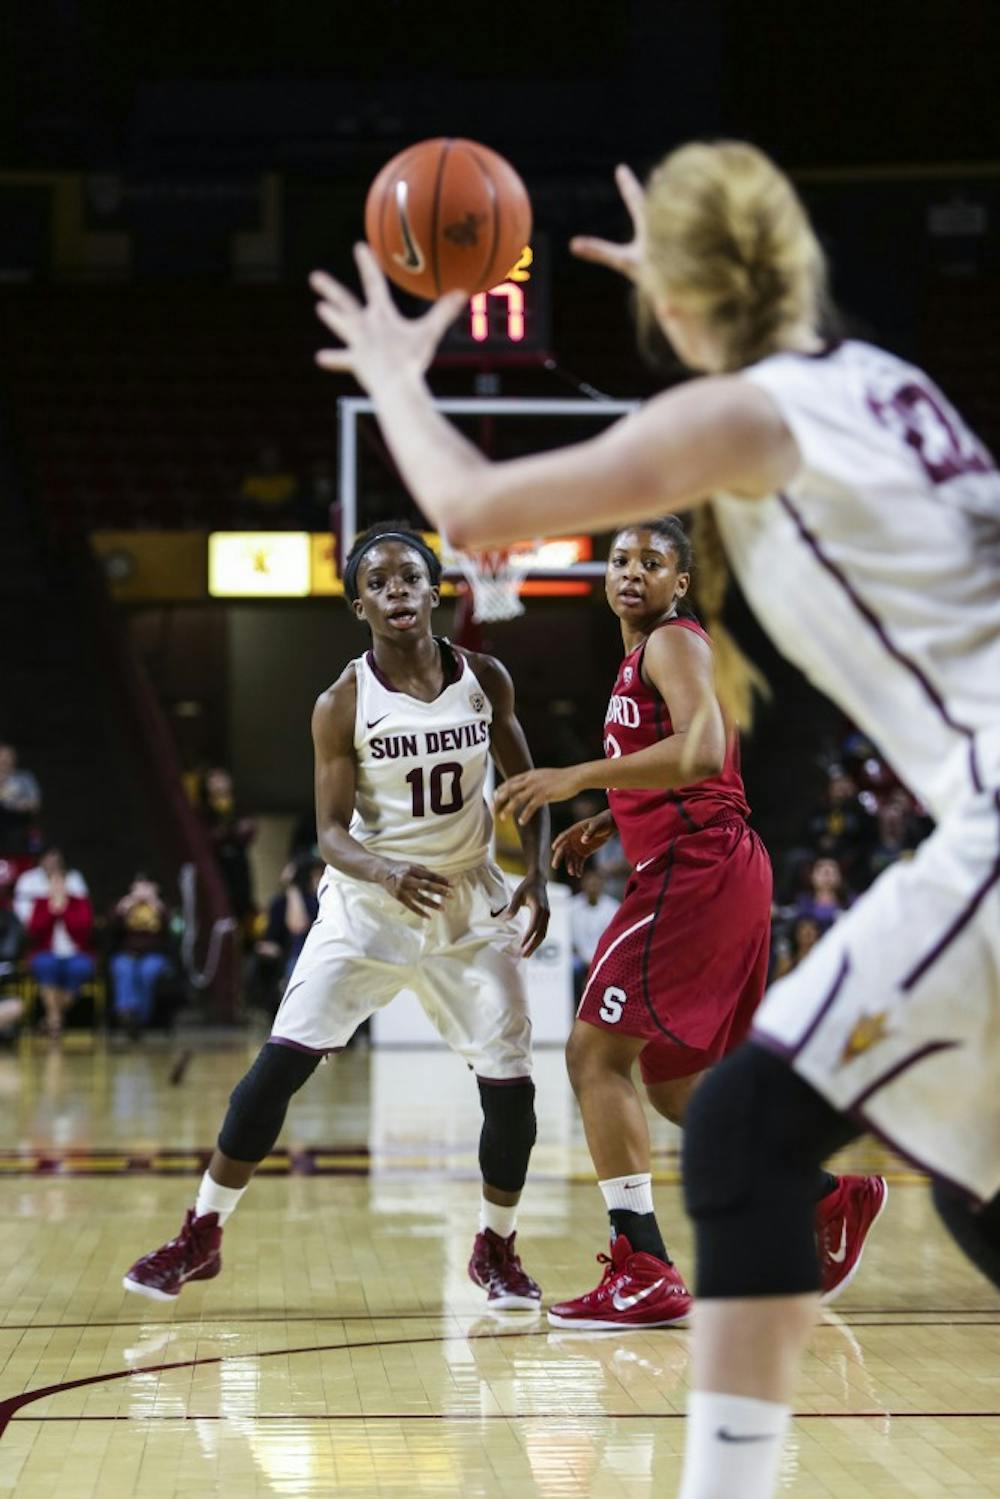 Hoops’ upset: ASU senior forward Becca Tobin goes up against WSU redshirt freshman guard Ireti Amojo during the Sun Devils’ 70-65 loss on Thursday. Mistakes ultimately doomed the Sun Devils, who trailed for the vast majority of the game. (Photo courtesy of Beth Easterbrook)